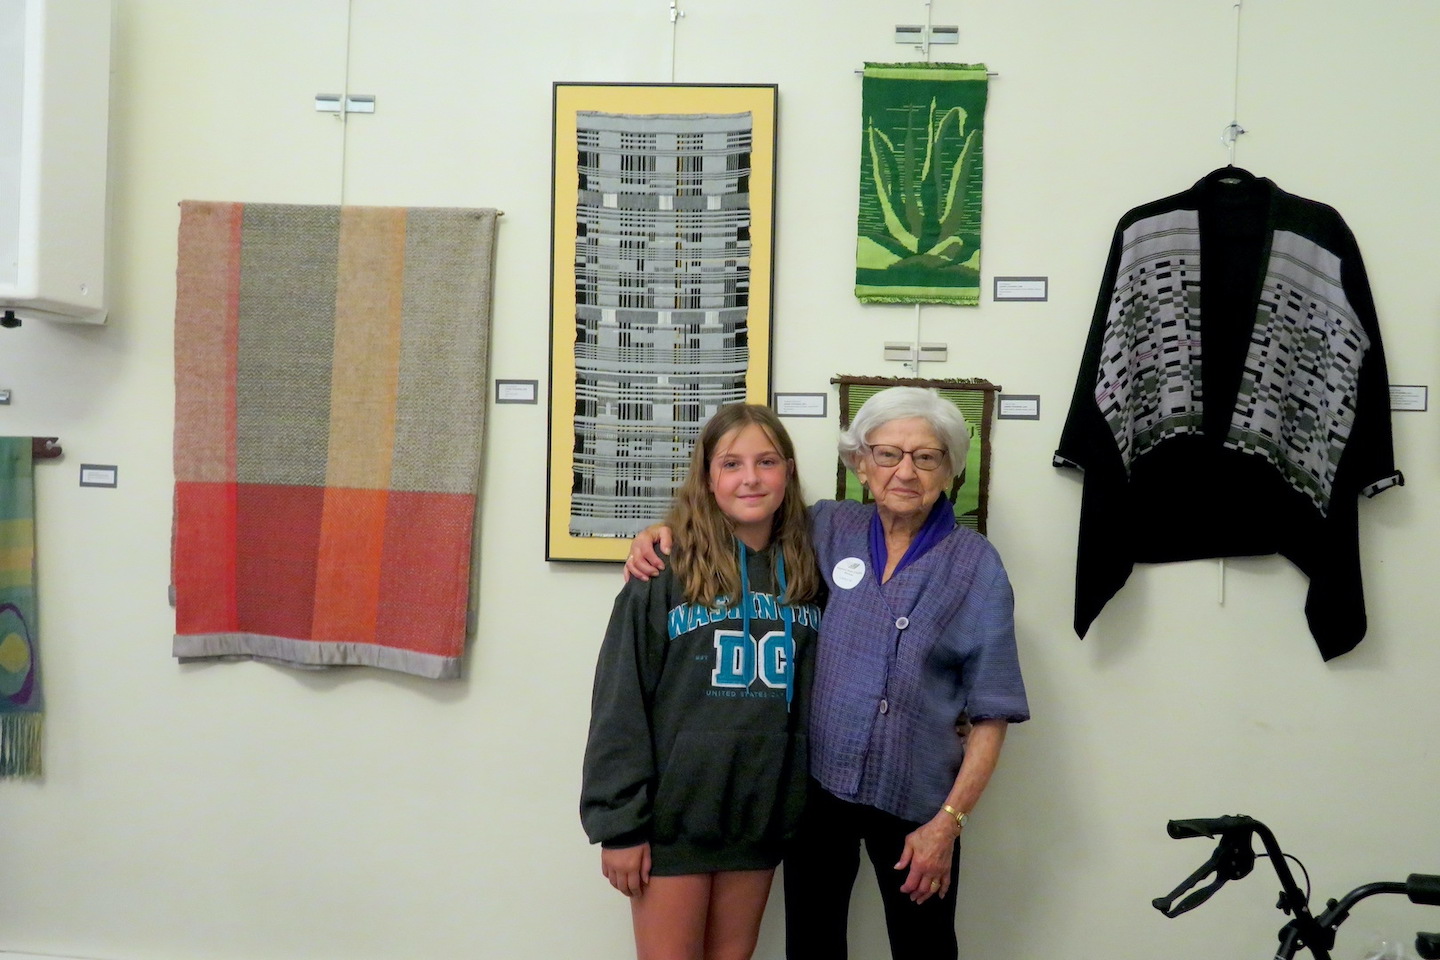 Some of Lenore Tetkowski's weavings are on display through the end of this month at Unity Church of Buffalo, 1243 Delaware Ave. Tetkowski and a young friend are shown at the July 9 opening of her exhibit at the Unity Church of Buffalo.